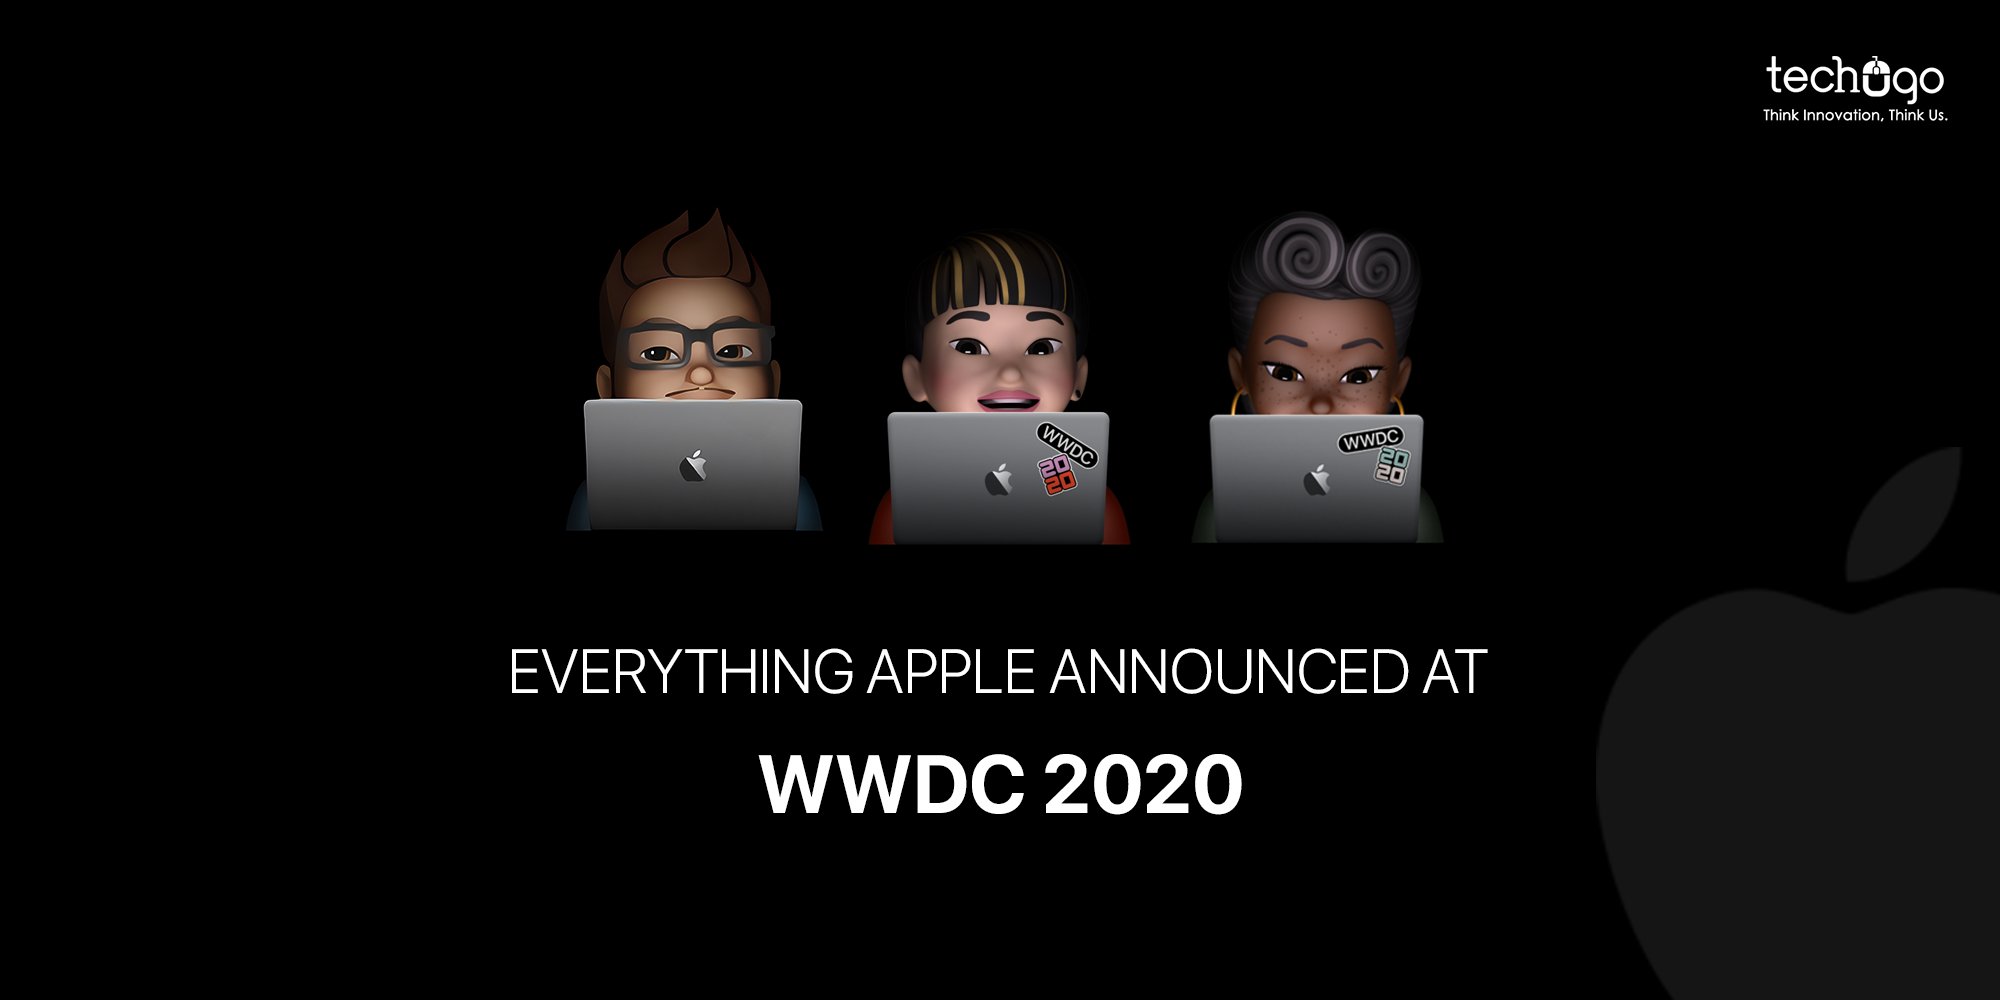 EVERYTHING APPLE ANNOUNCED AT WWDC 2020